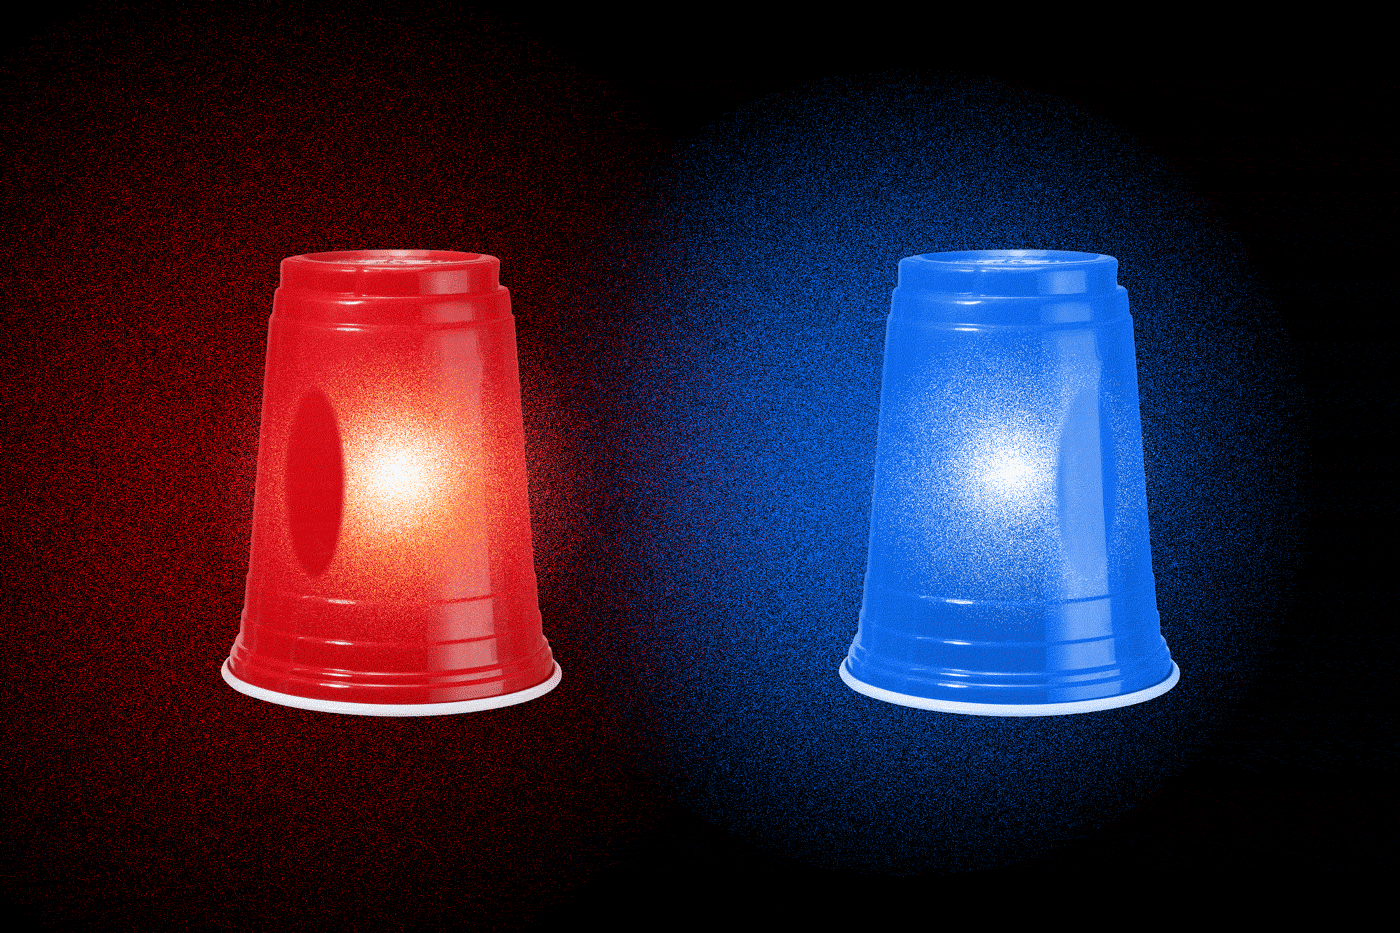 animated illustration of two upside-down red and blue plastic cups as flashing police lights